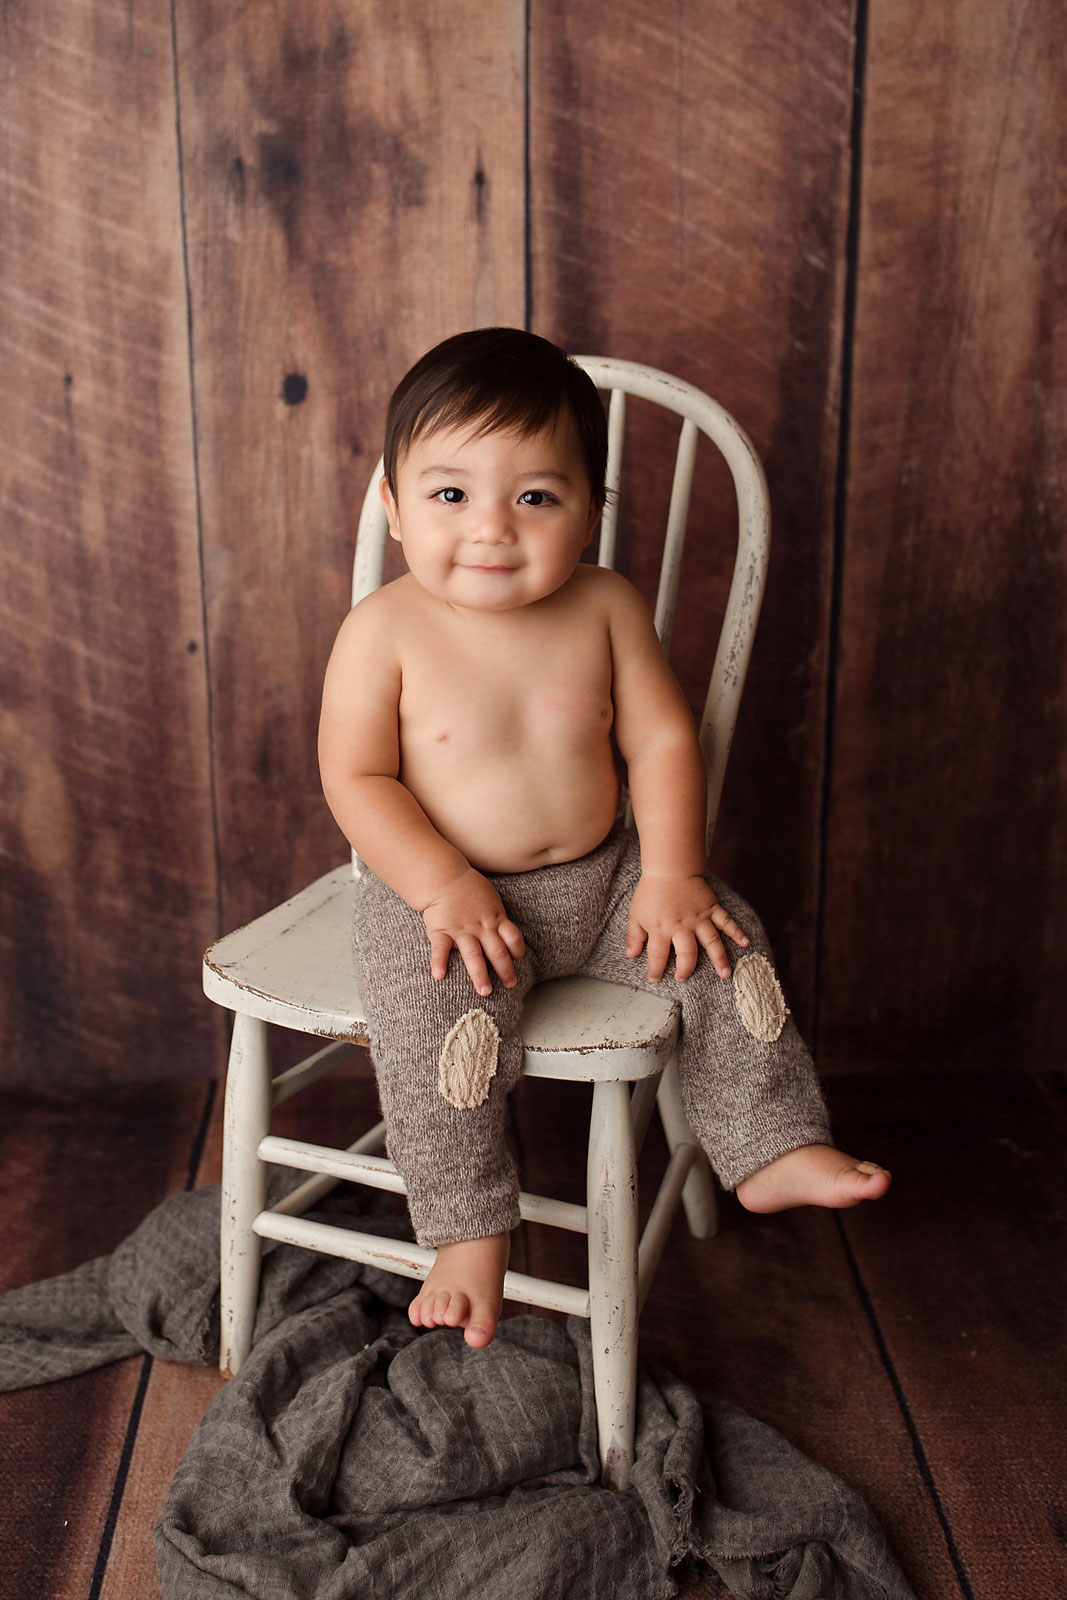 baby photo session union county nj, toddler boy in patched pants on antique chair against wood plank backdrop